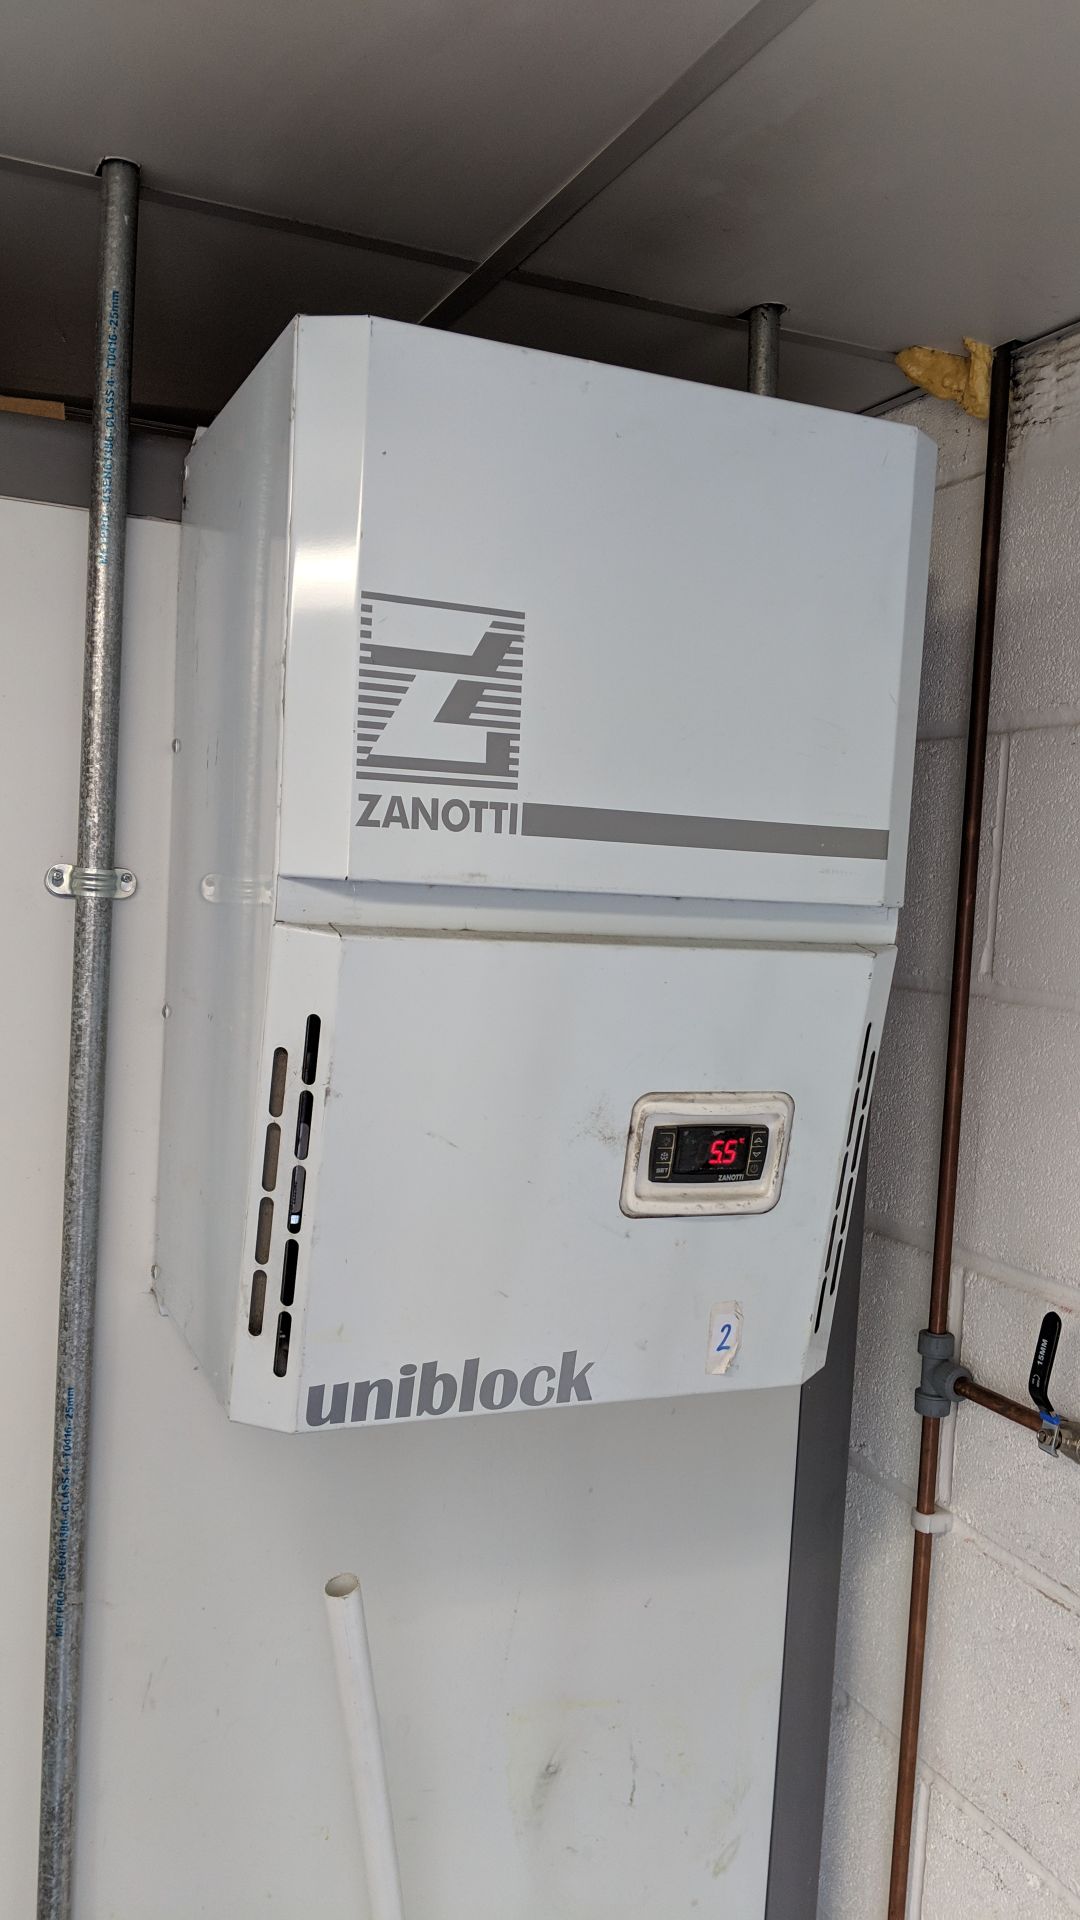 Walk-in cold room, including Uniblock Zanotti control panel/cooler. The pictures of the cold store - Image 18 of 18